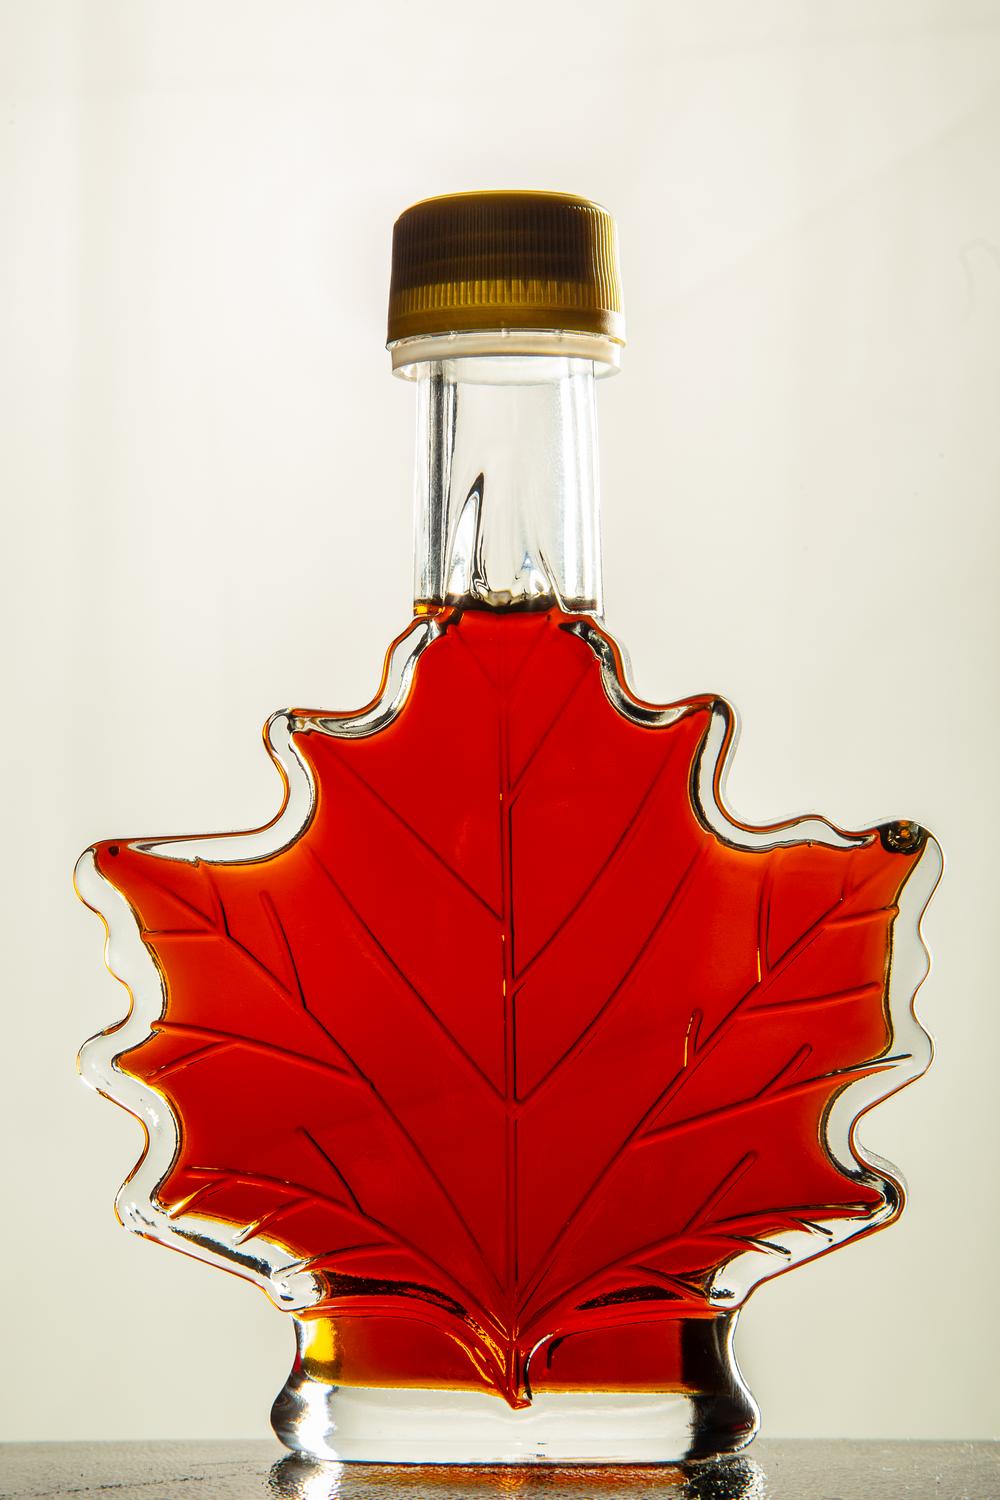 UK to offer series of maple syrup workshops | College News